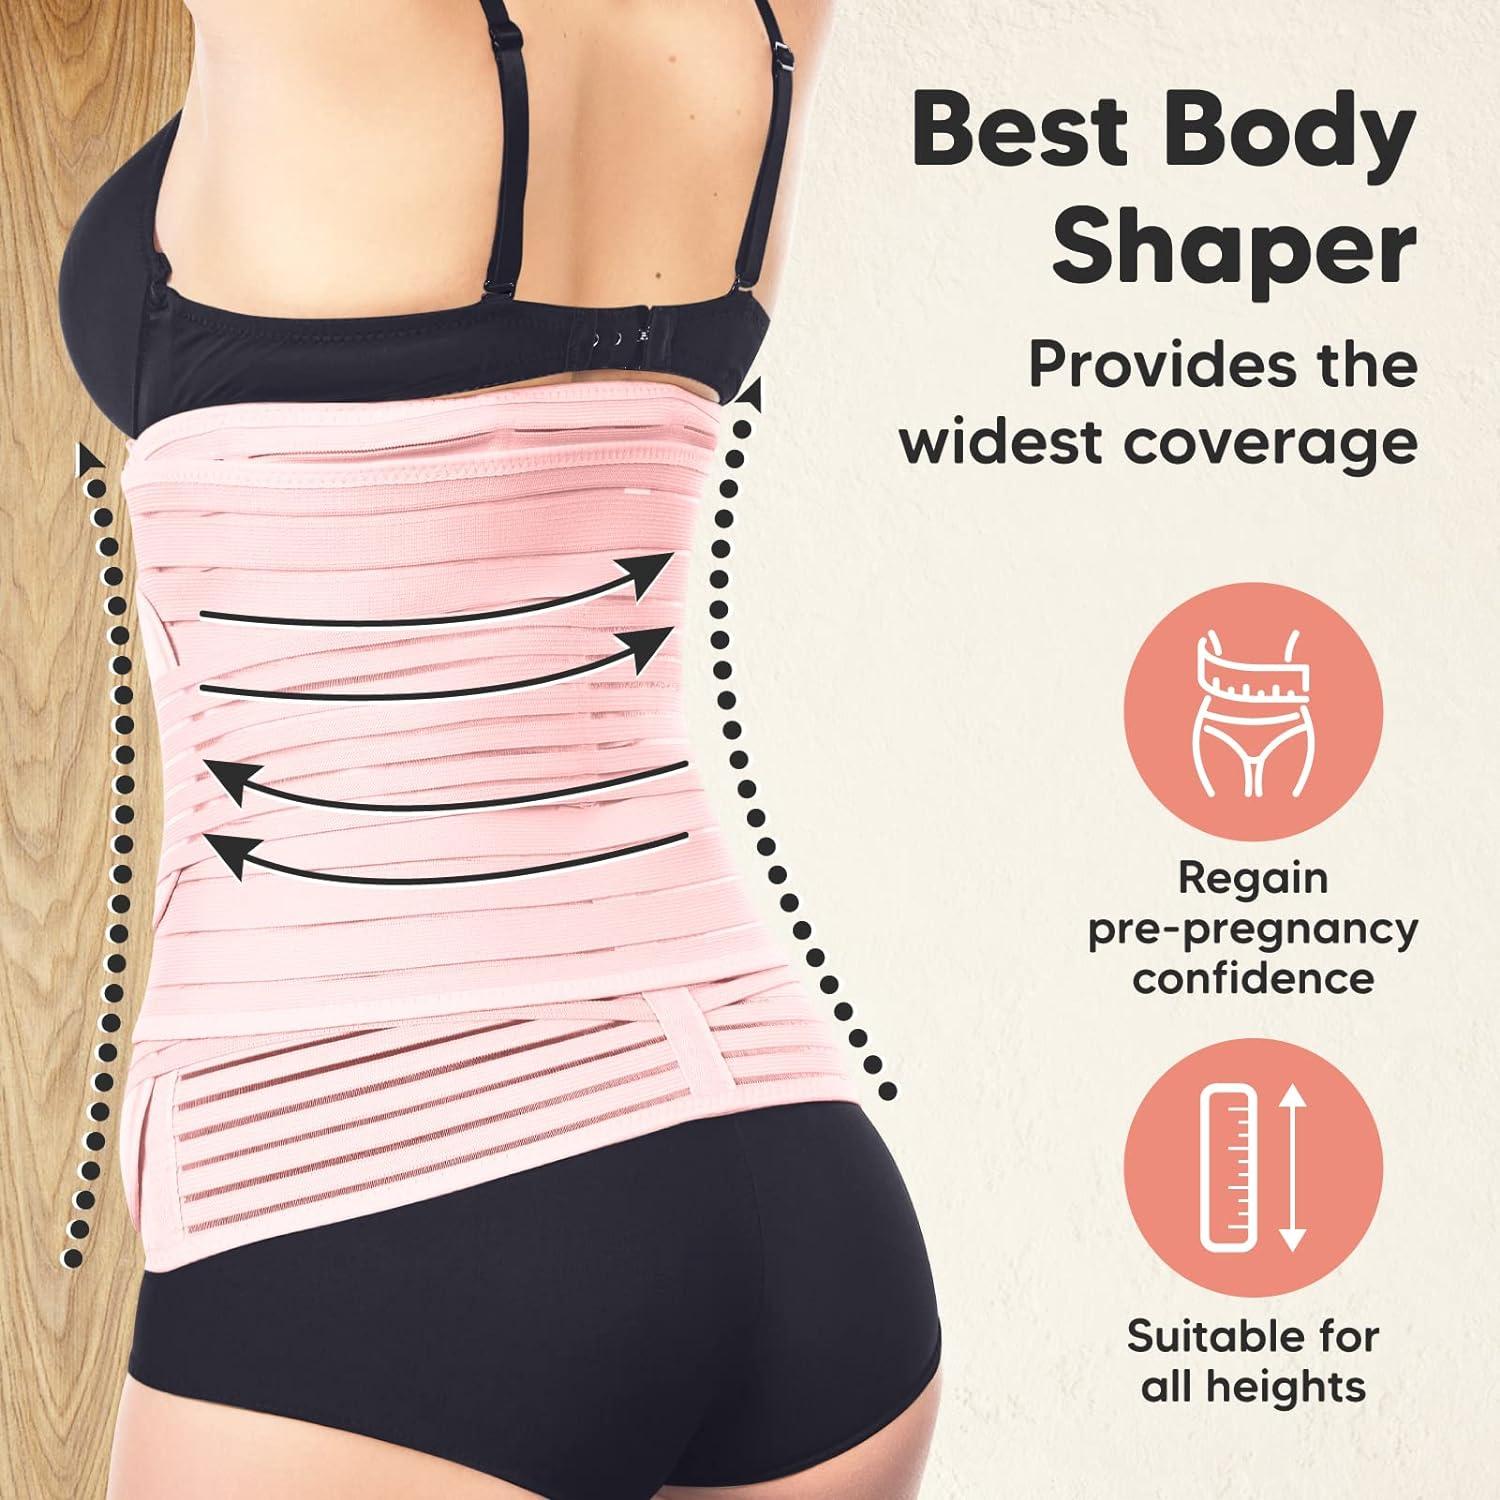 Postpartum Belly Support Recovery Wrap-Belly Band Postnatal-Body